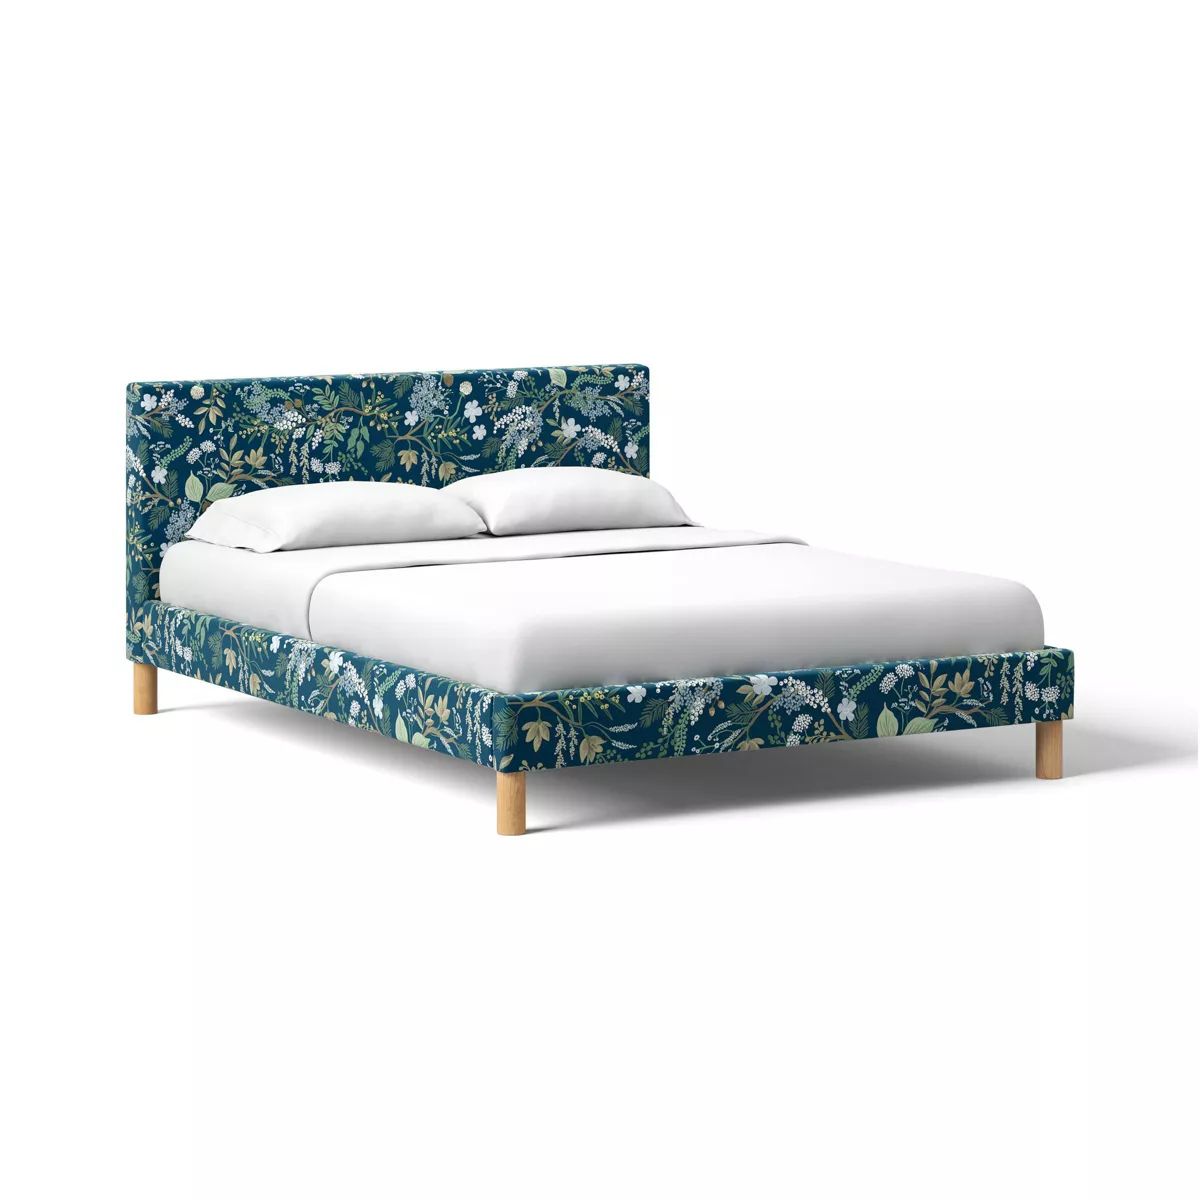 Rifle Paper Co. x Target Upholstered Bed | Target